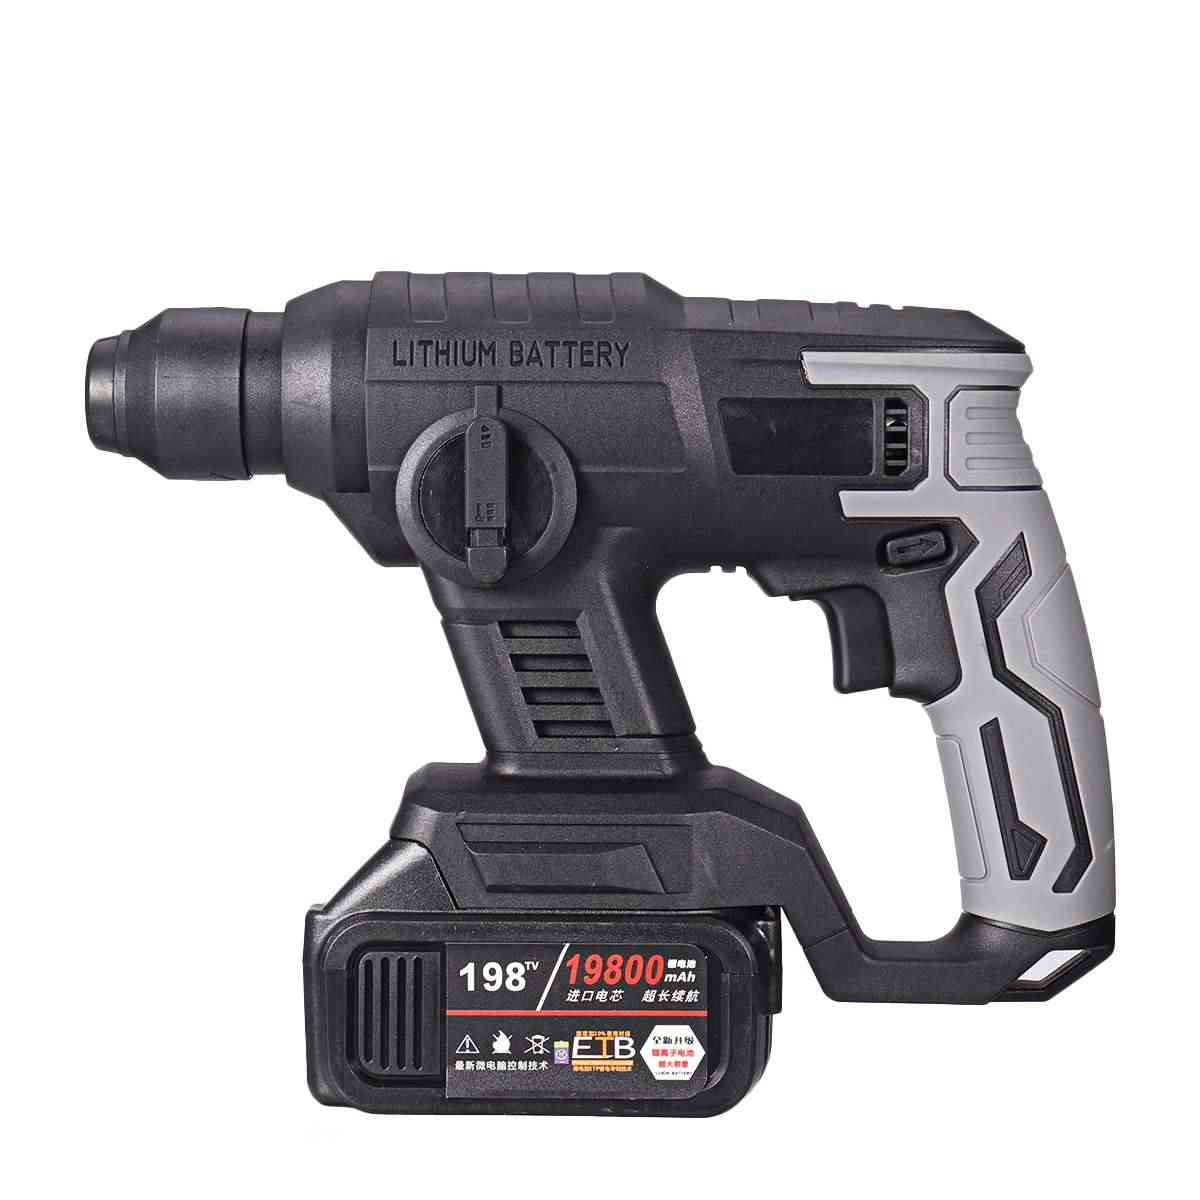 Multifunction- Electric Heavy Duty Hammer, Impact Power Drill Tool